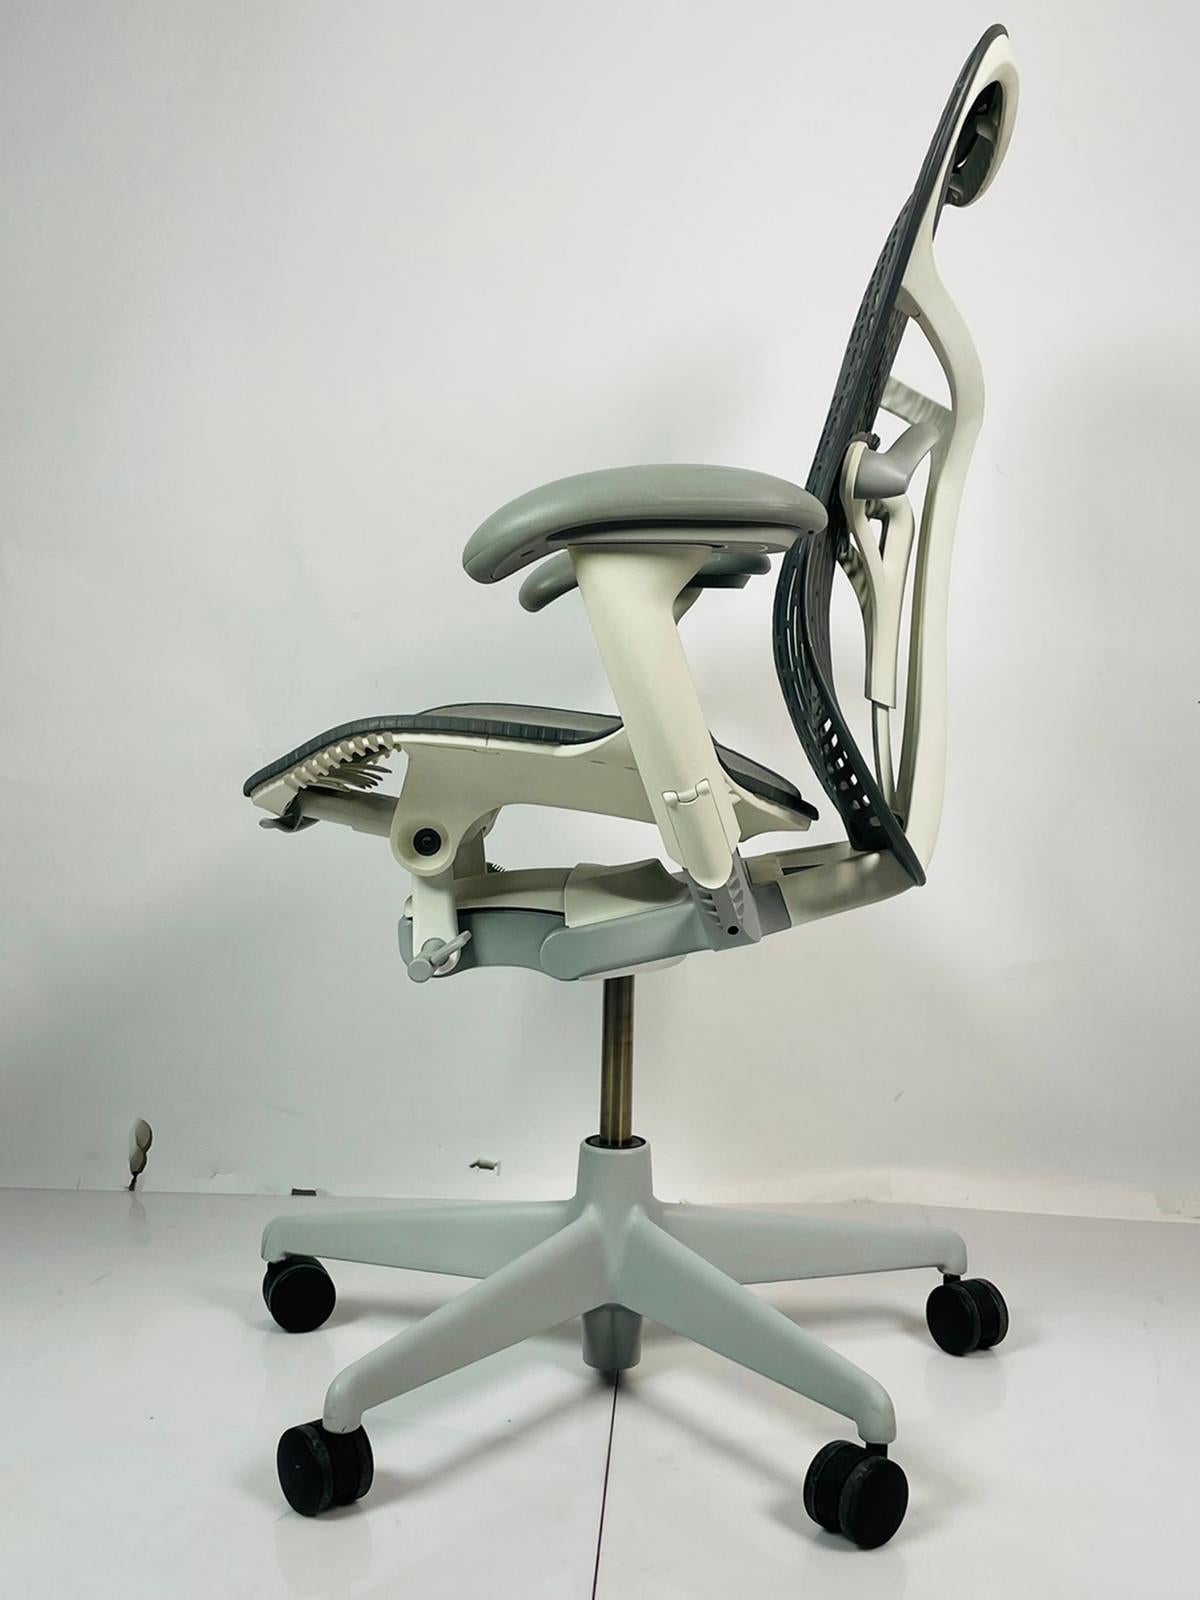 Introducing the Mirra 2 Office Chair by Studio 7.5 for Herman Miller, the perfect blend of comfort, style, and functionality. Made in the USA in 2015, this gray office chair is a must-have for any modern workspace. Equipped with wheels for easy